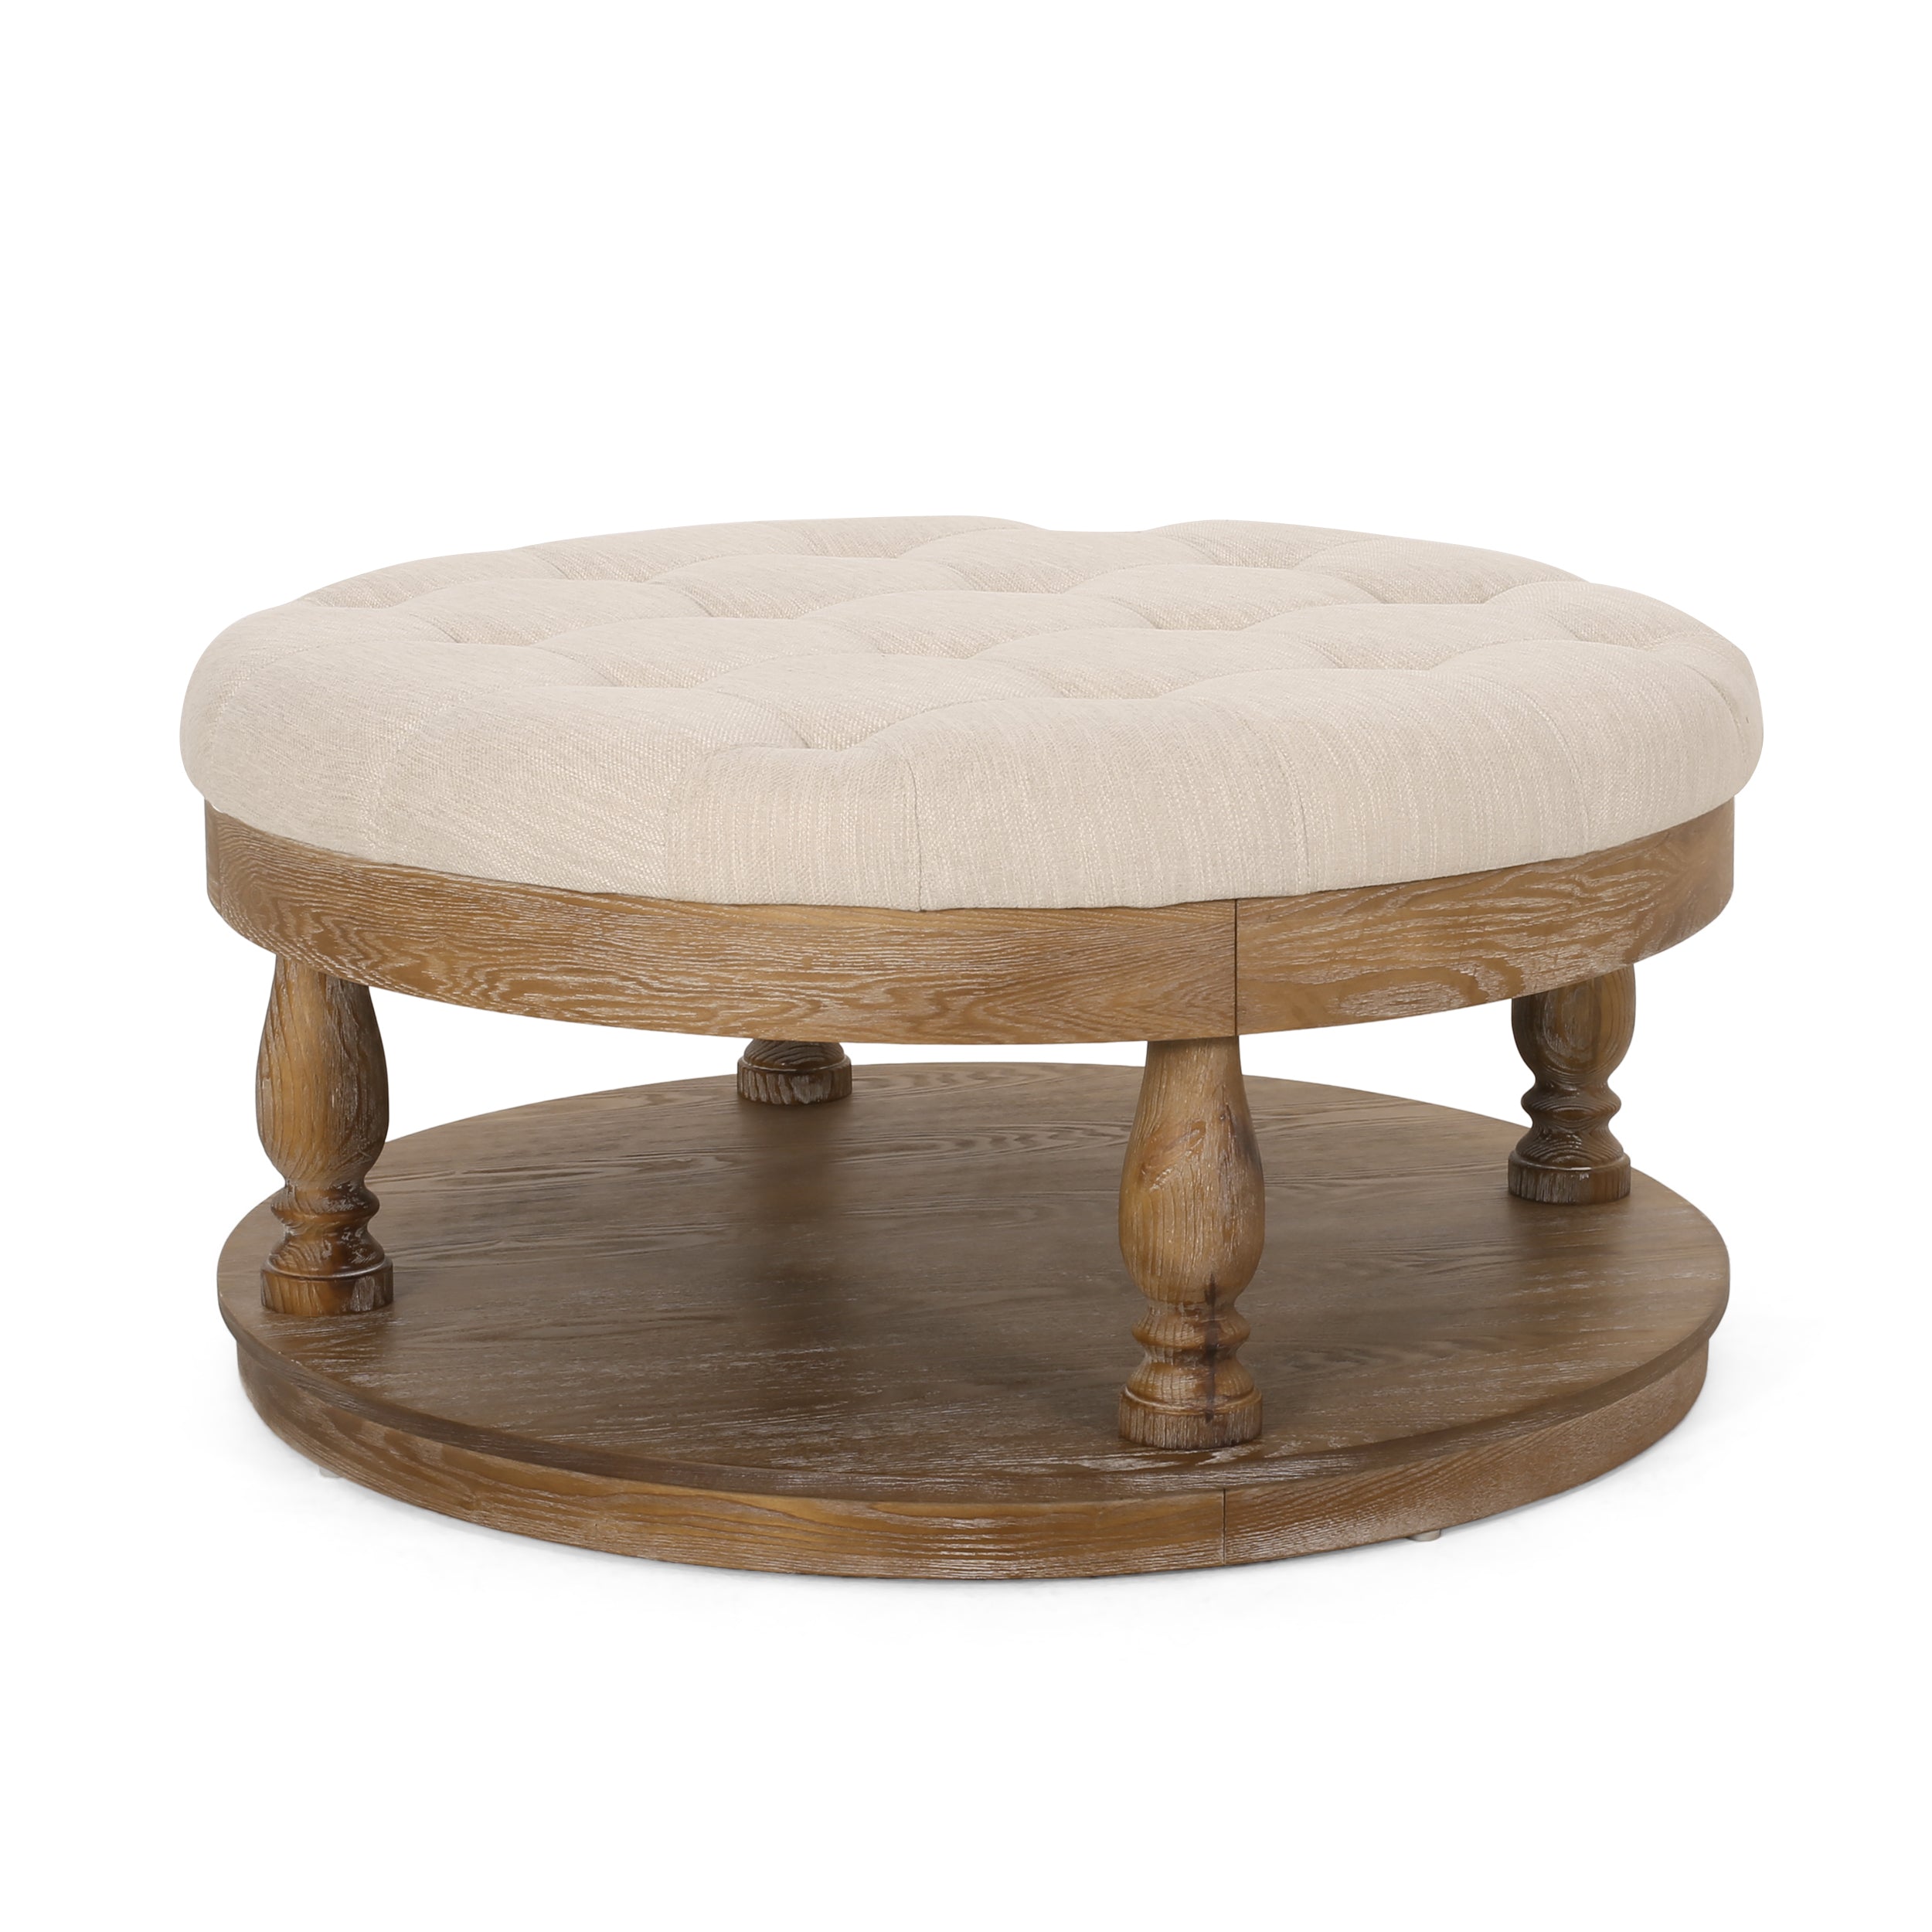 Andrue Contemporary Upholstered Round Ottoman WeatheredCognac